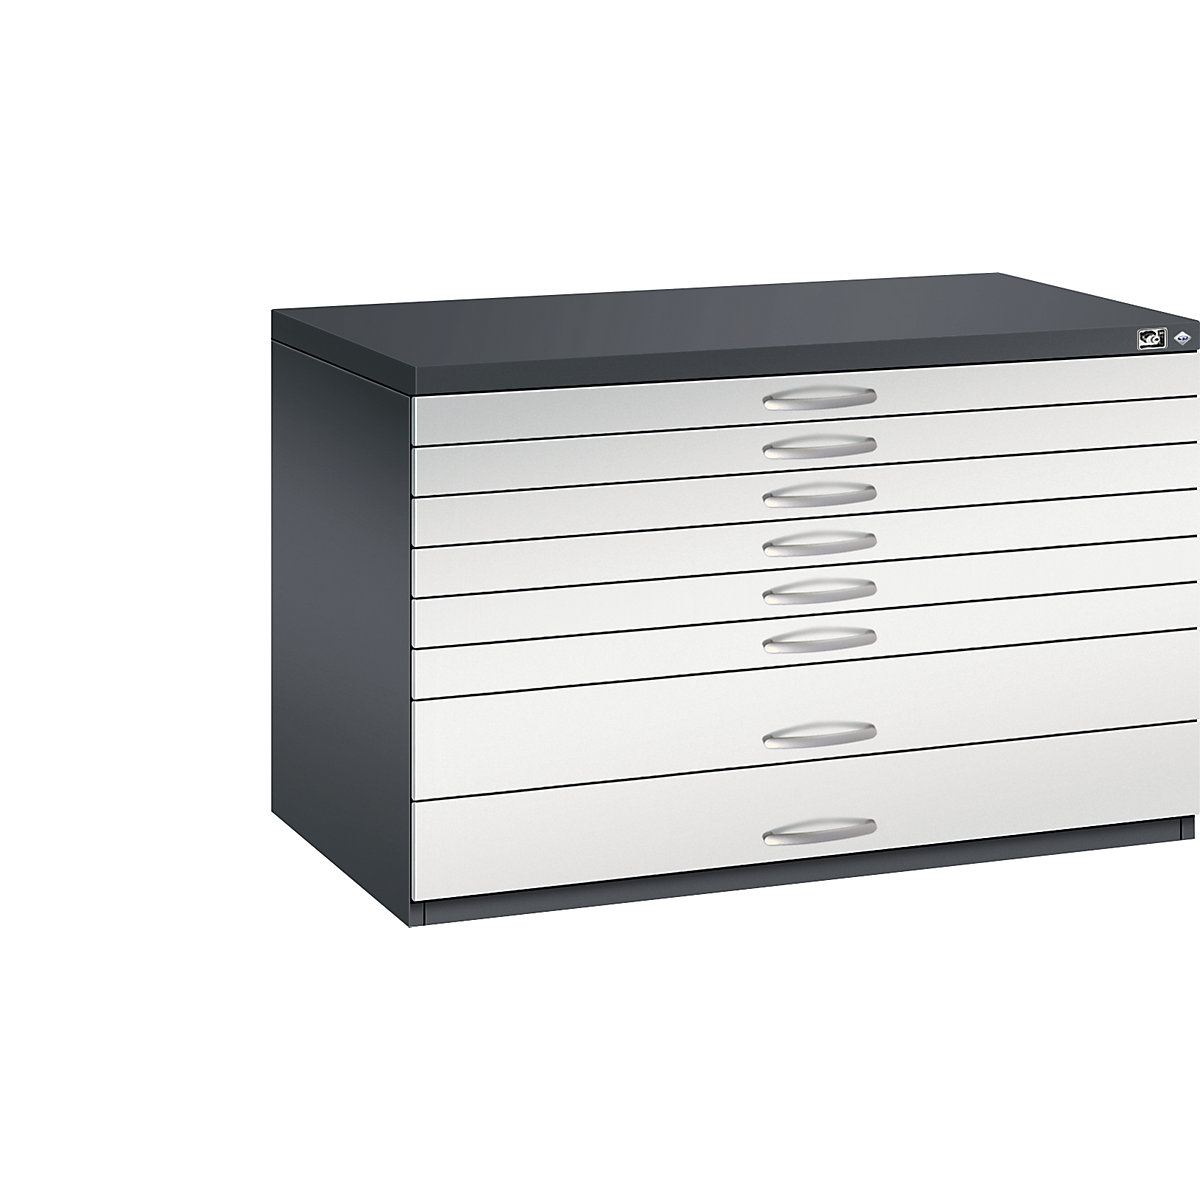 Drawing cabinet – C+P, A1, 8 drawers, height 760 mm, black grey / light grey-12